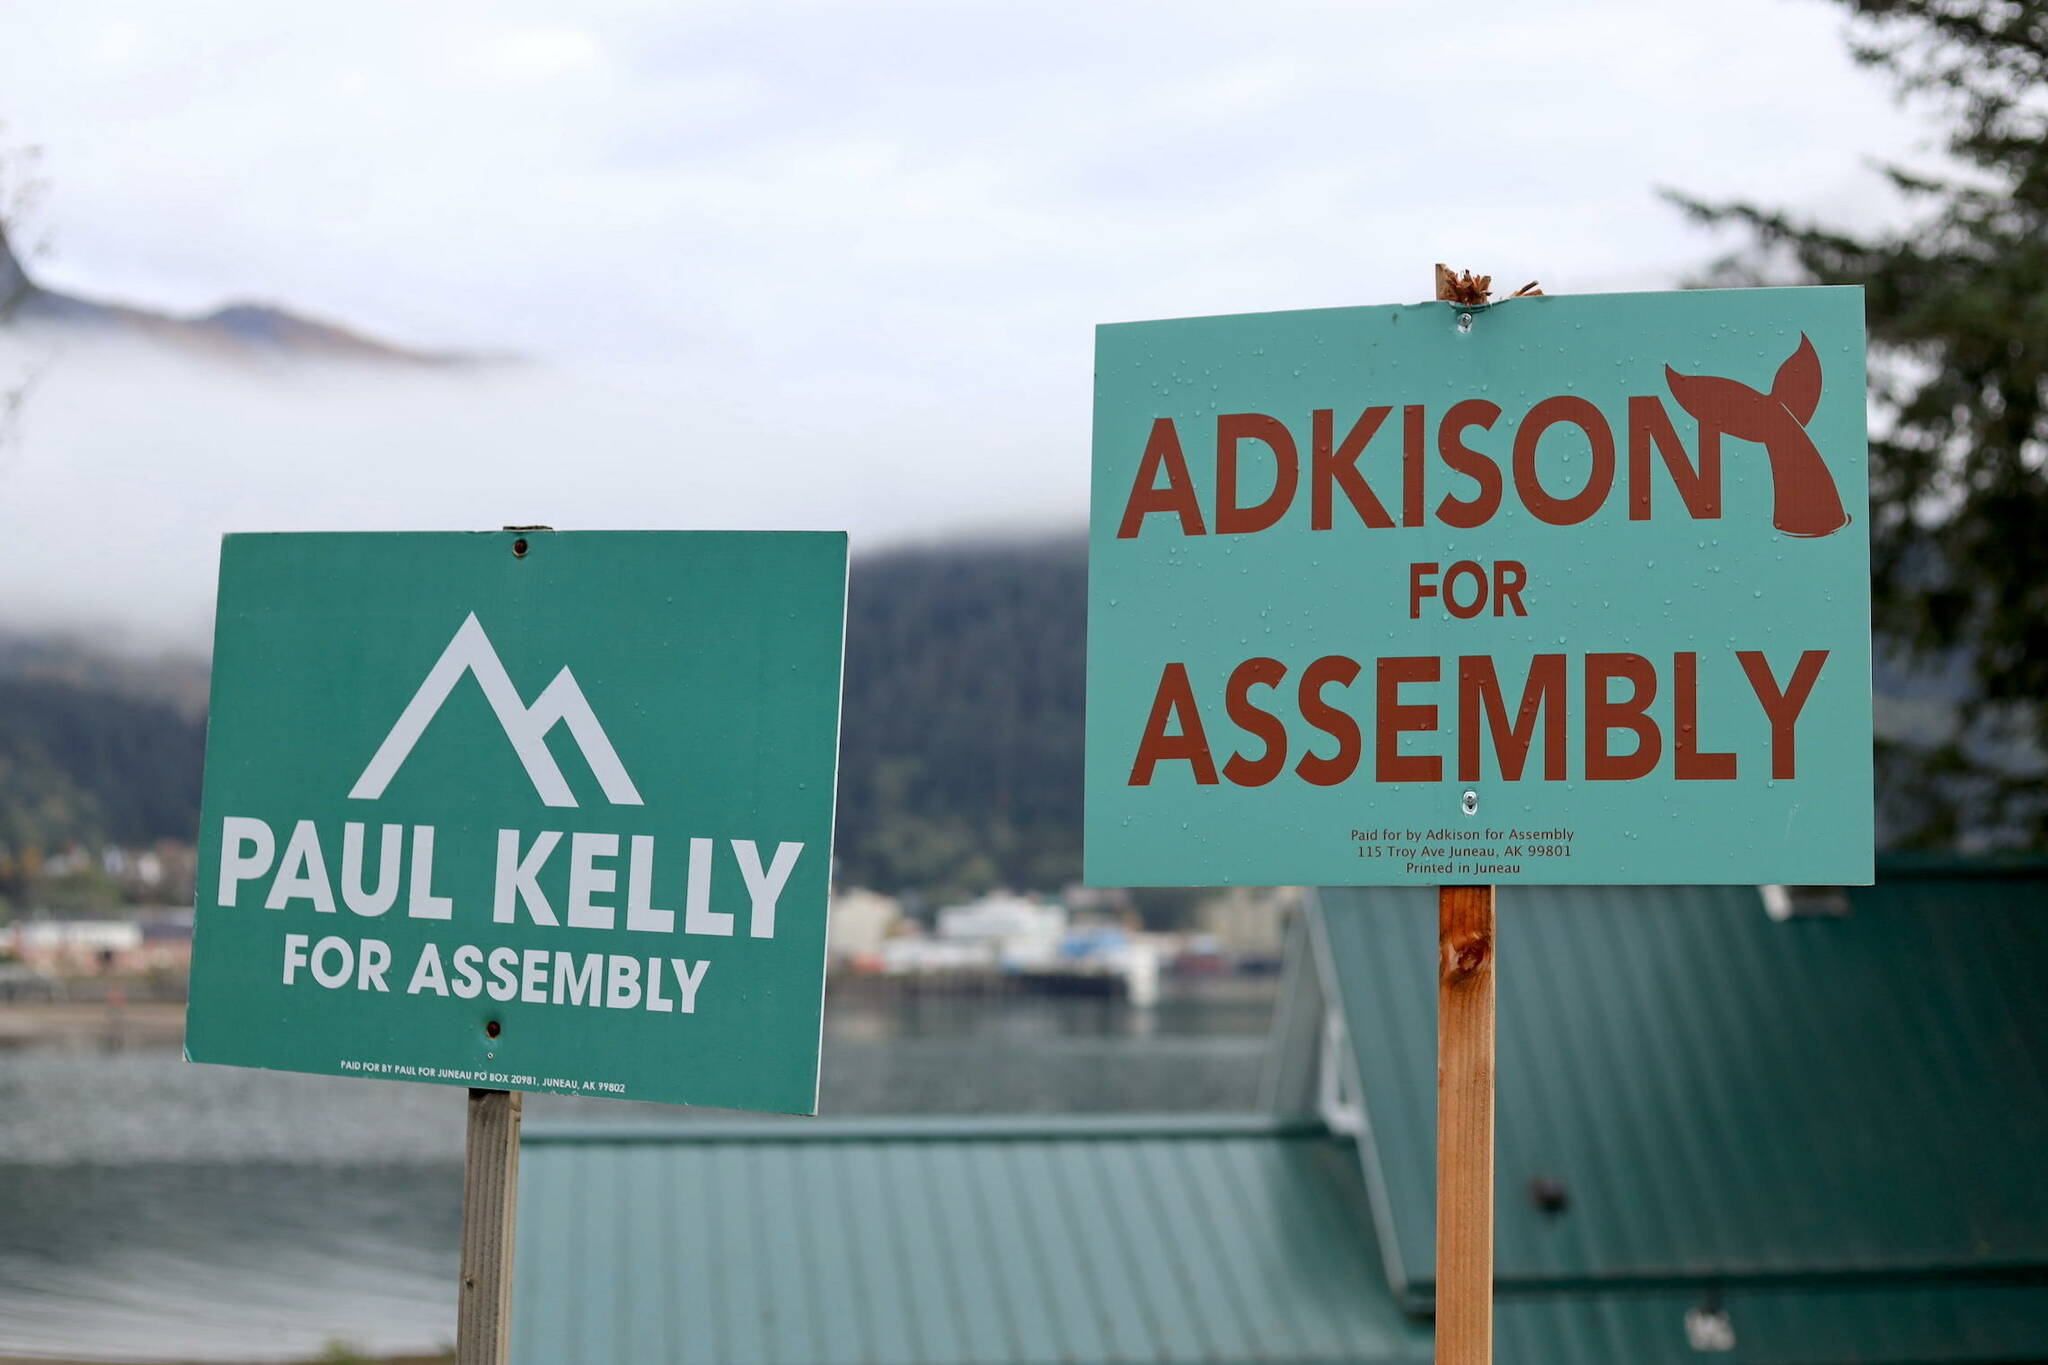 Campaign signs for Areawide Assembly candidates Paul Kelly and Ella Adkison sit side-by-side in a yard on Douglas. Kelly and Adkison are the candidates currently leading in the 10-person field for two open Assembly Areawide seats, according to preliminary results released Wednesday morning. (Clarise Larson / Juneau Empire)